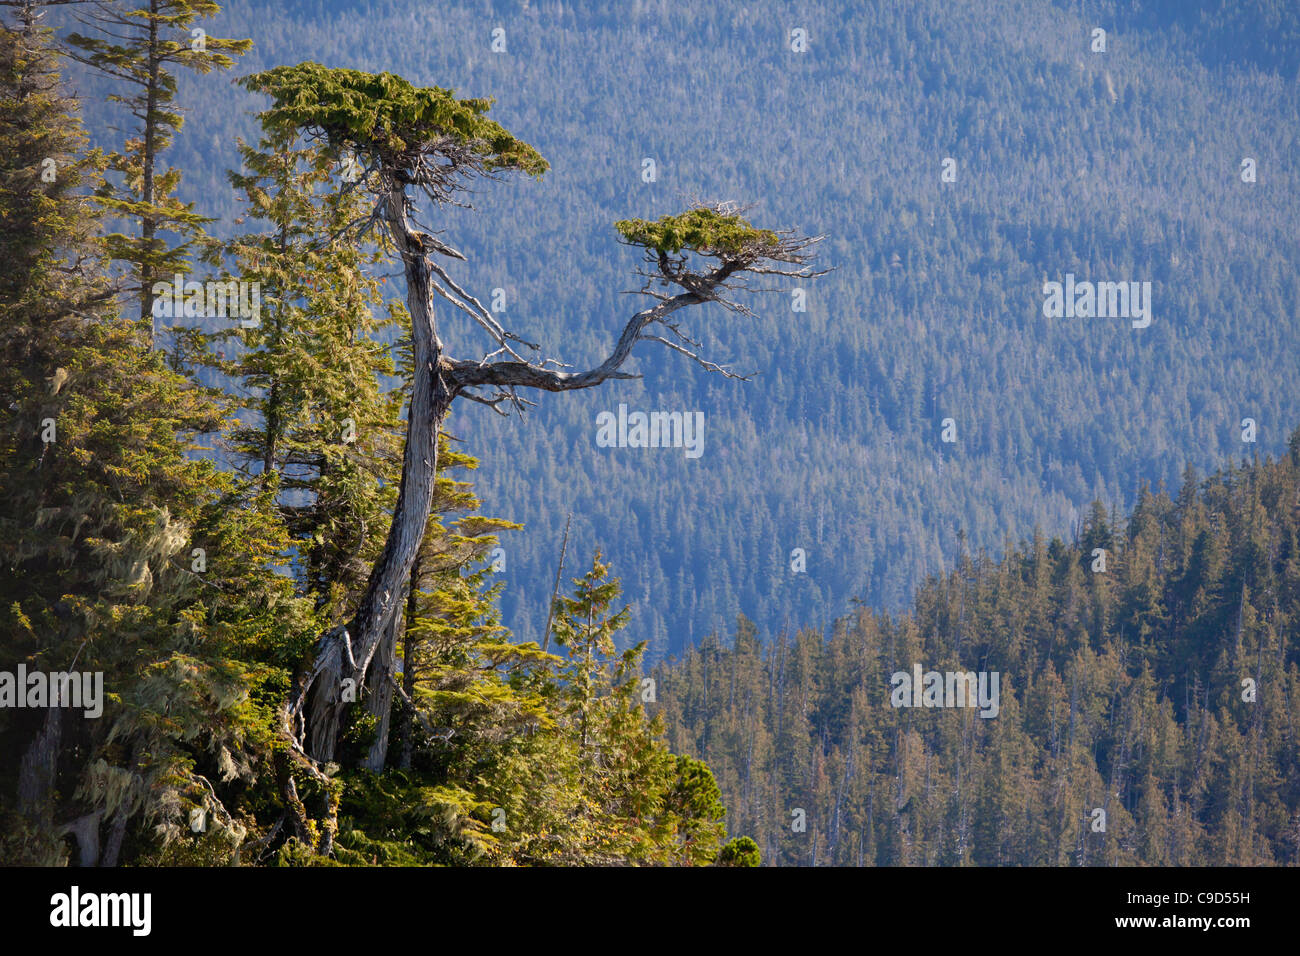 Trees in a rainforest, Great Bear Rainforest, British Columbia, Canada Stock Photo